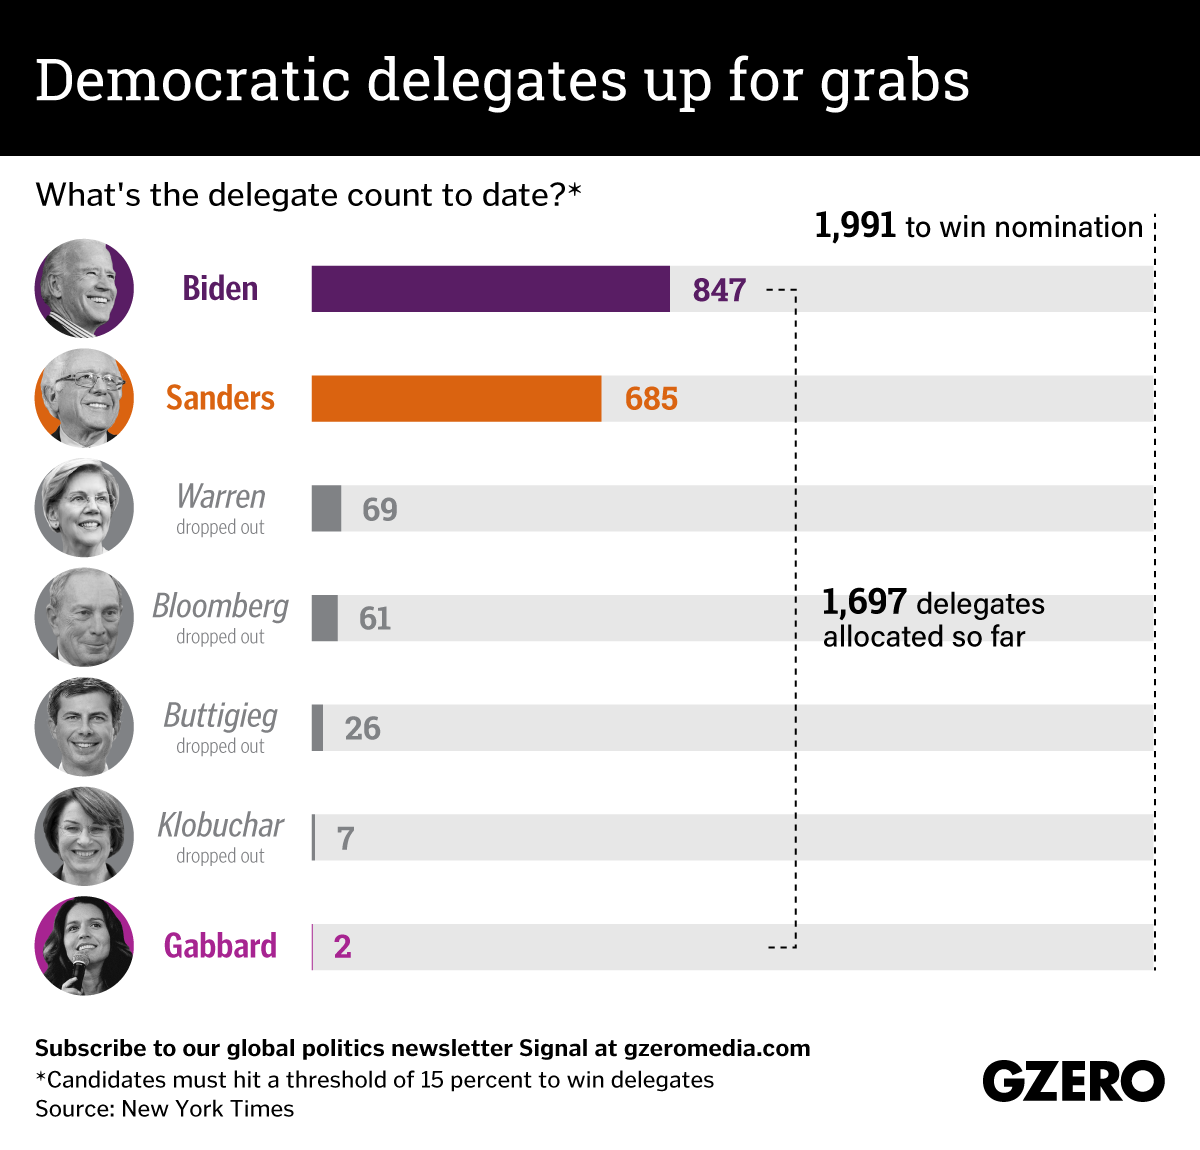 The Graphic Truth: Democratic delegates up for grabs